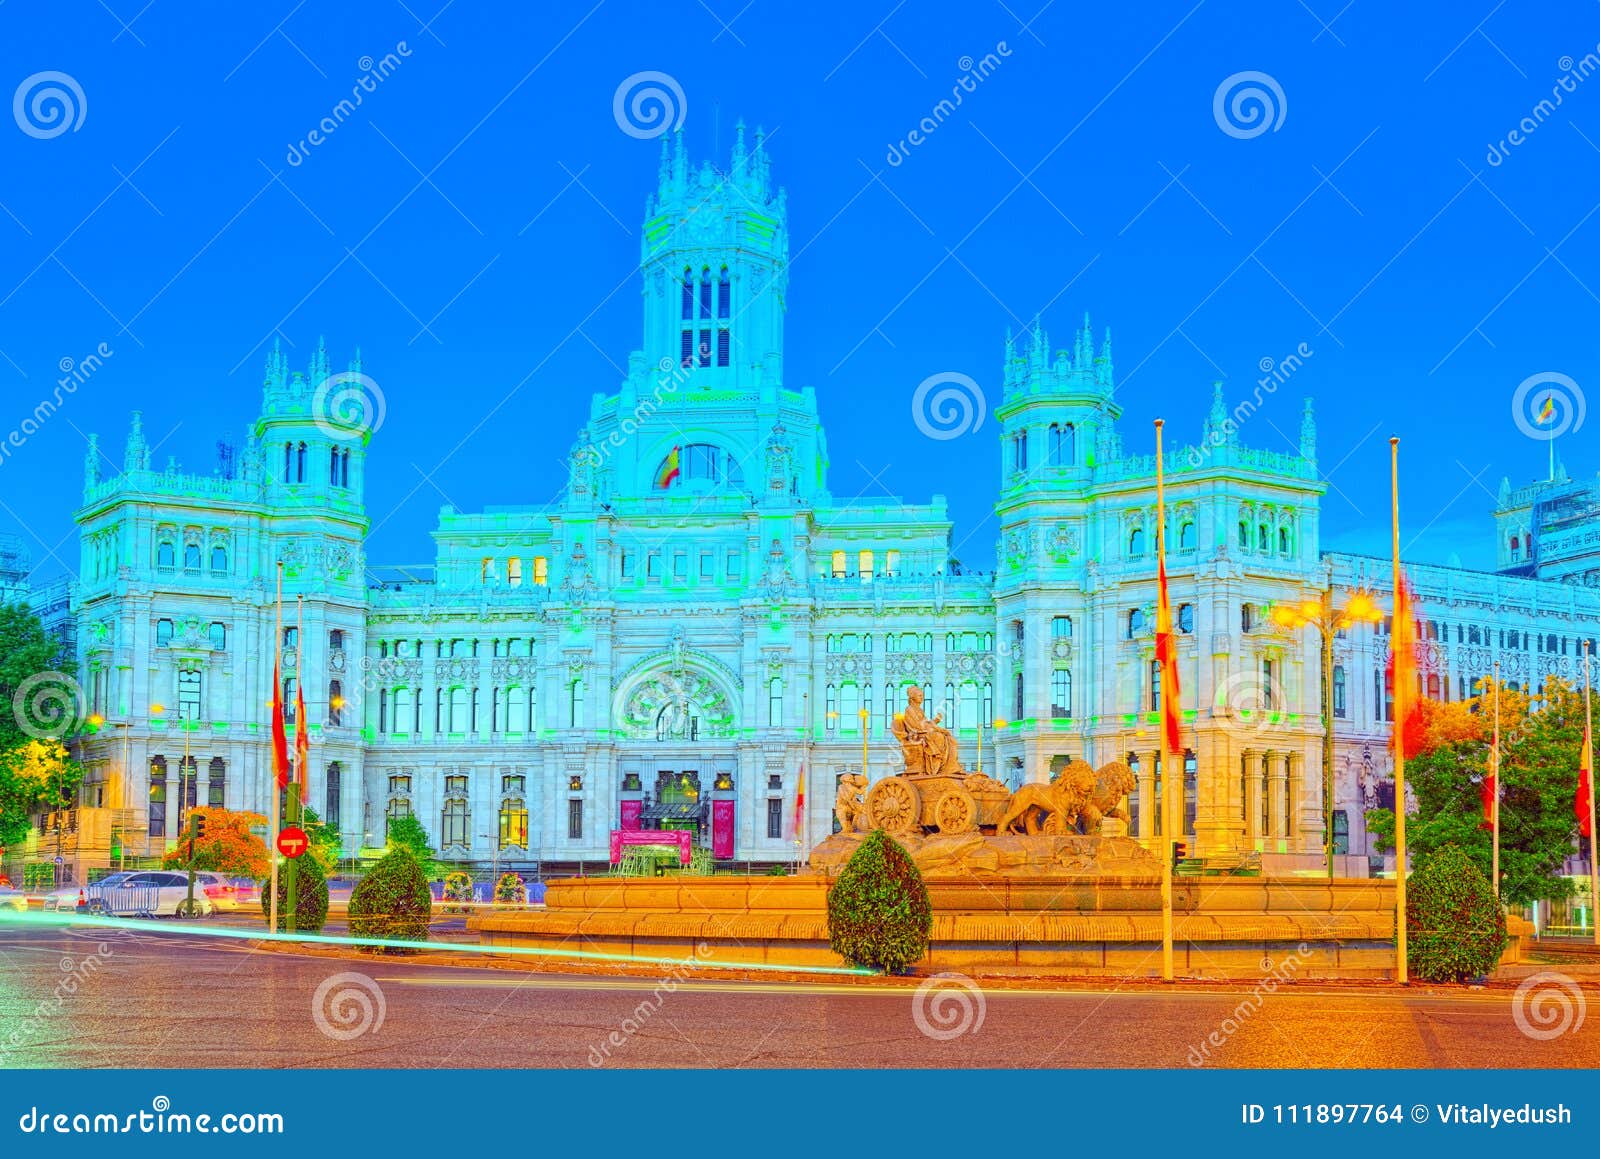 fountain of the goddess cibeles and cibeles center or palace of